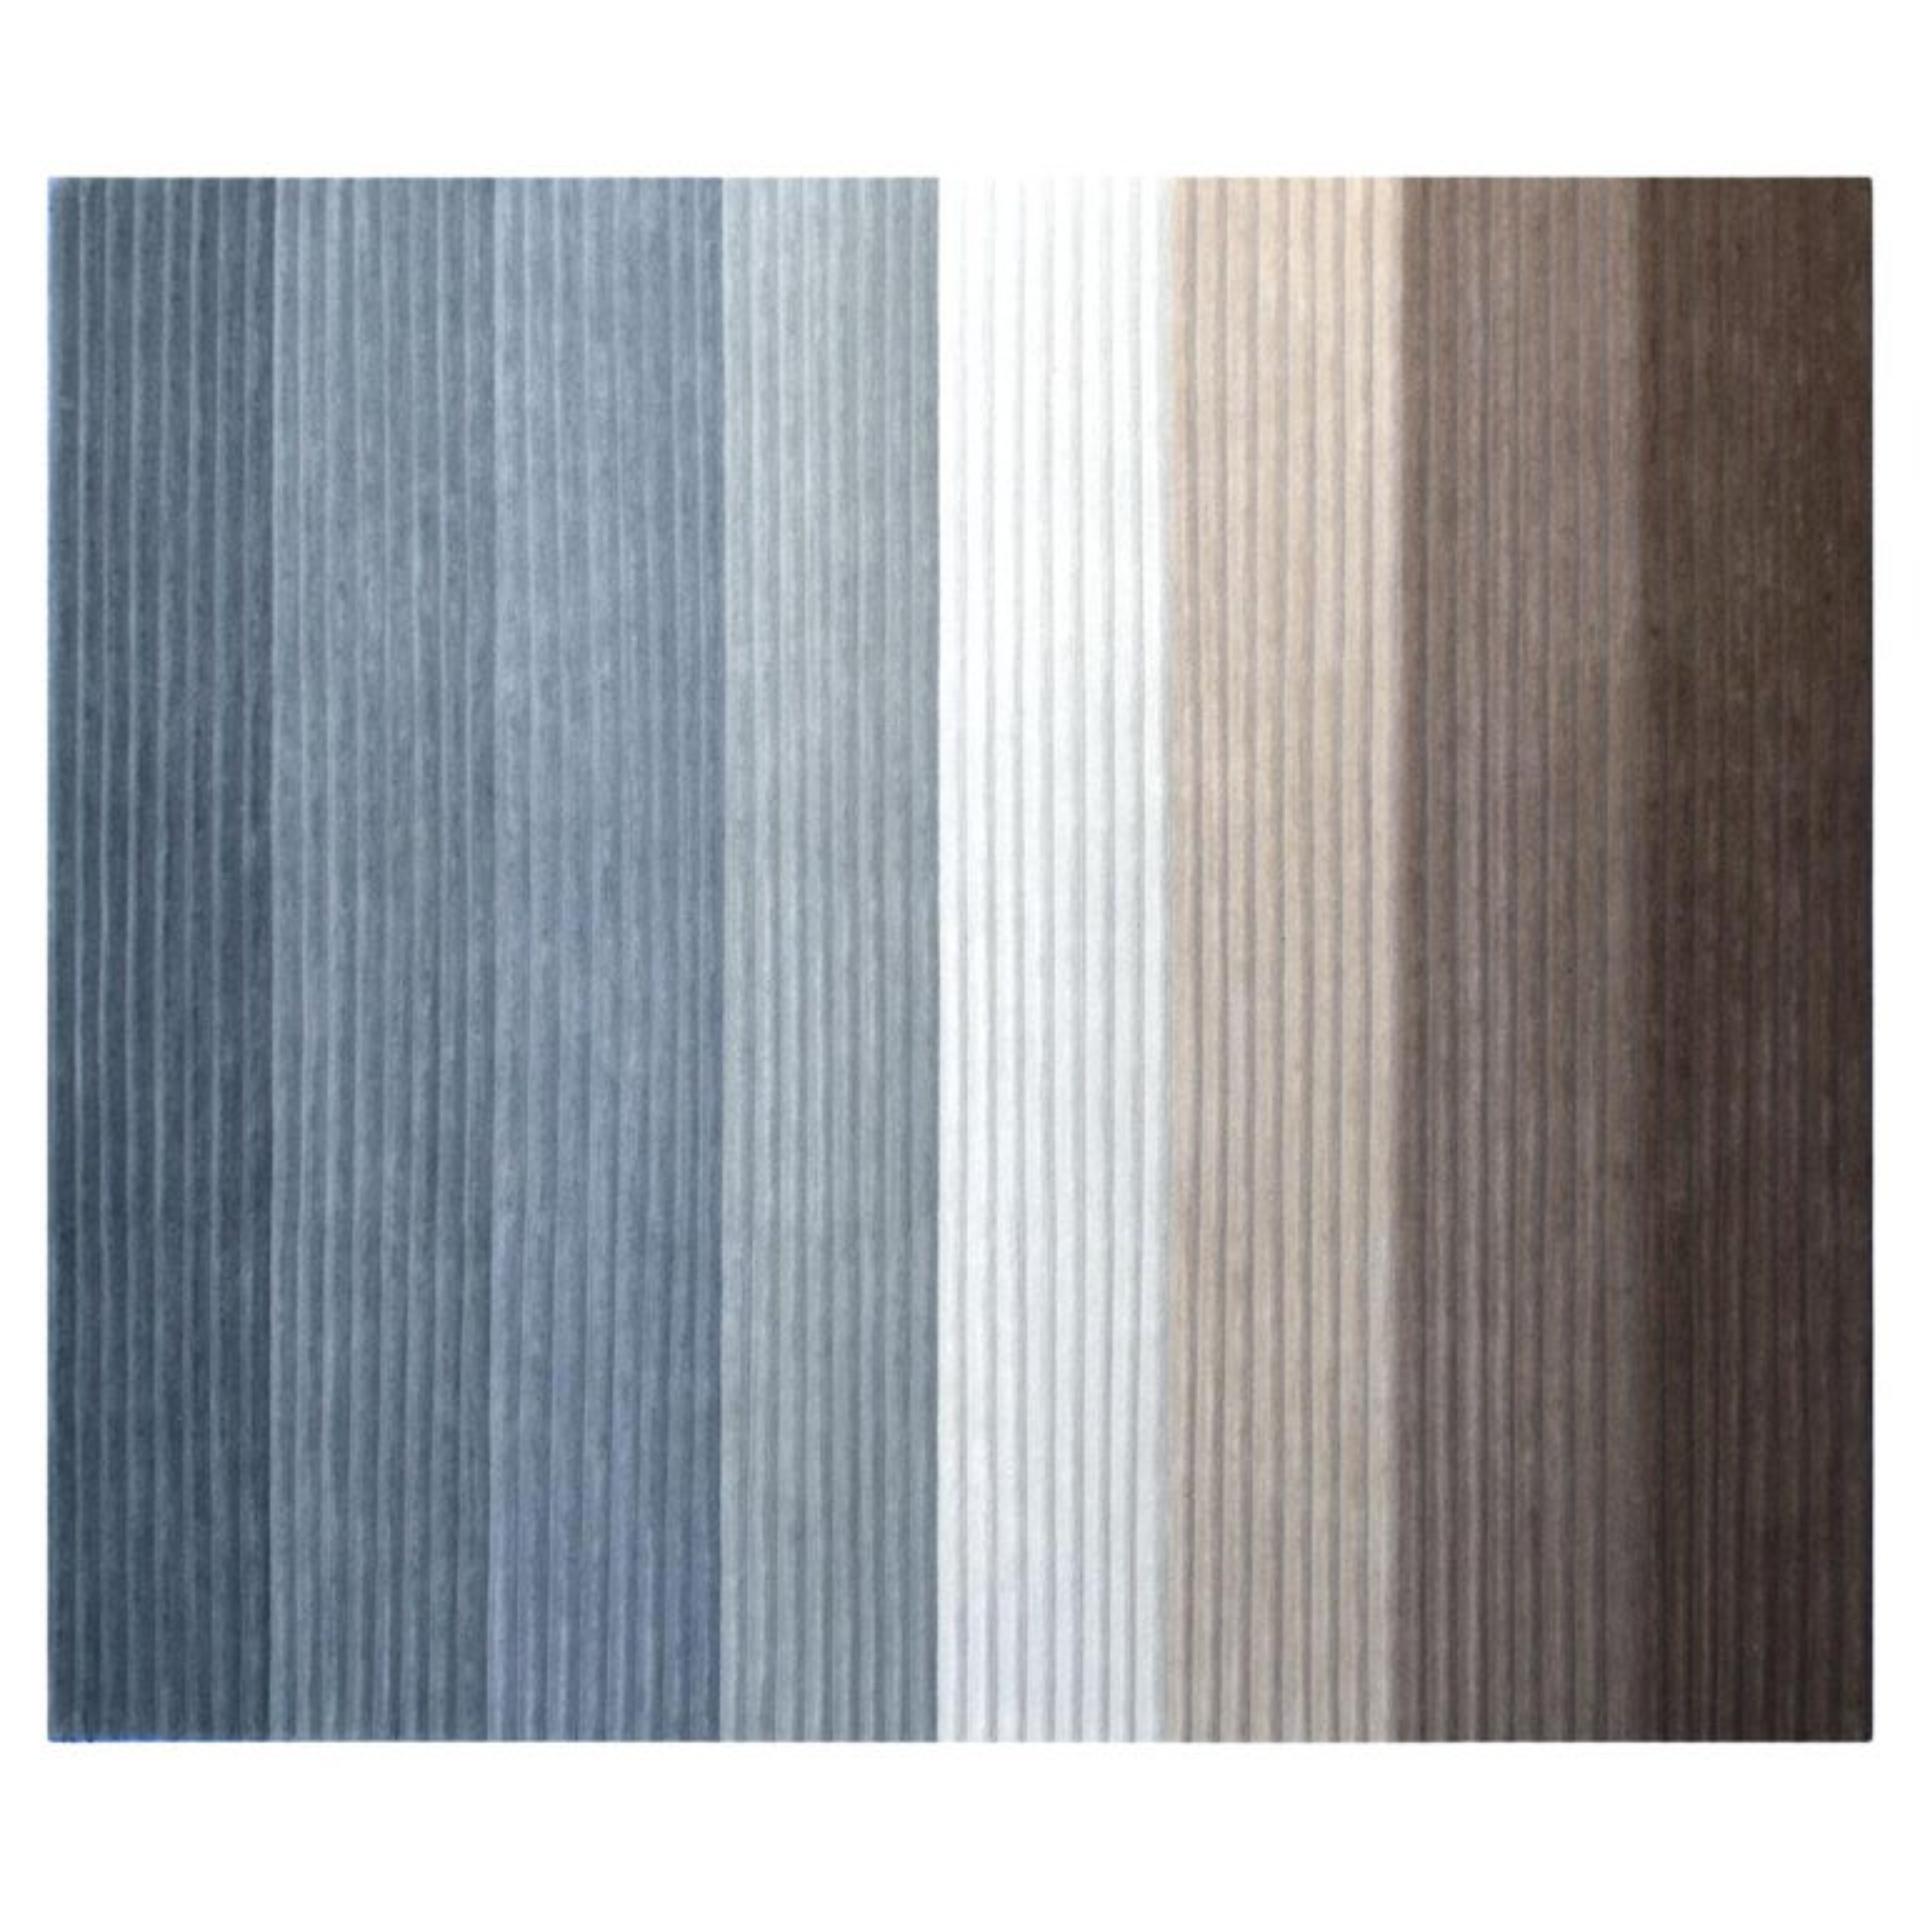 Corduroy medium rug by Art & Loom
Dimensions: D 274.3 x H 365.8 cm
Materials: 100% New Zealand wool
Quality (knots per inch): 100
Also available in different dimensions.

Samantha Gallacher has always had a keen eye for aesthetics, drawing